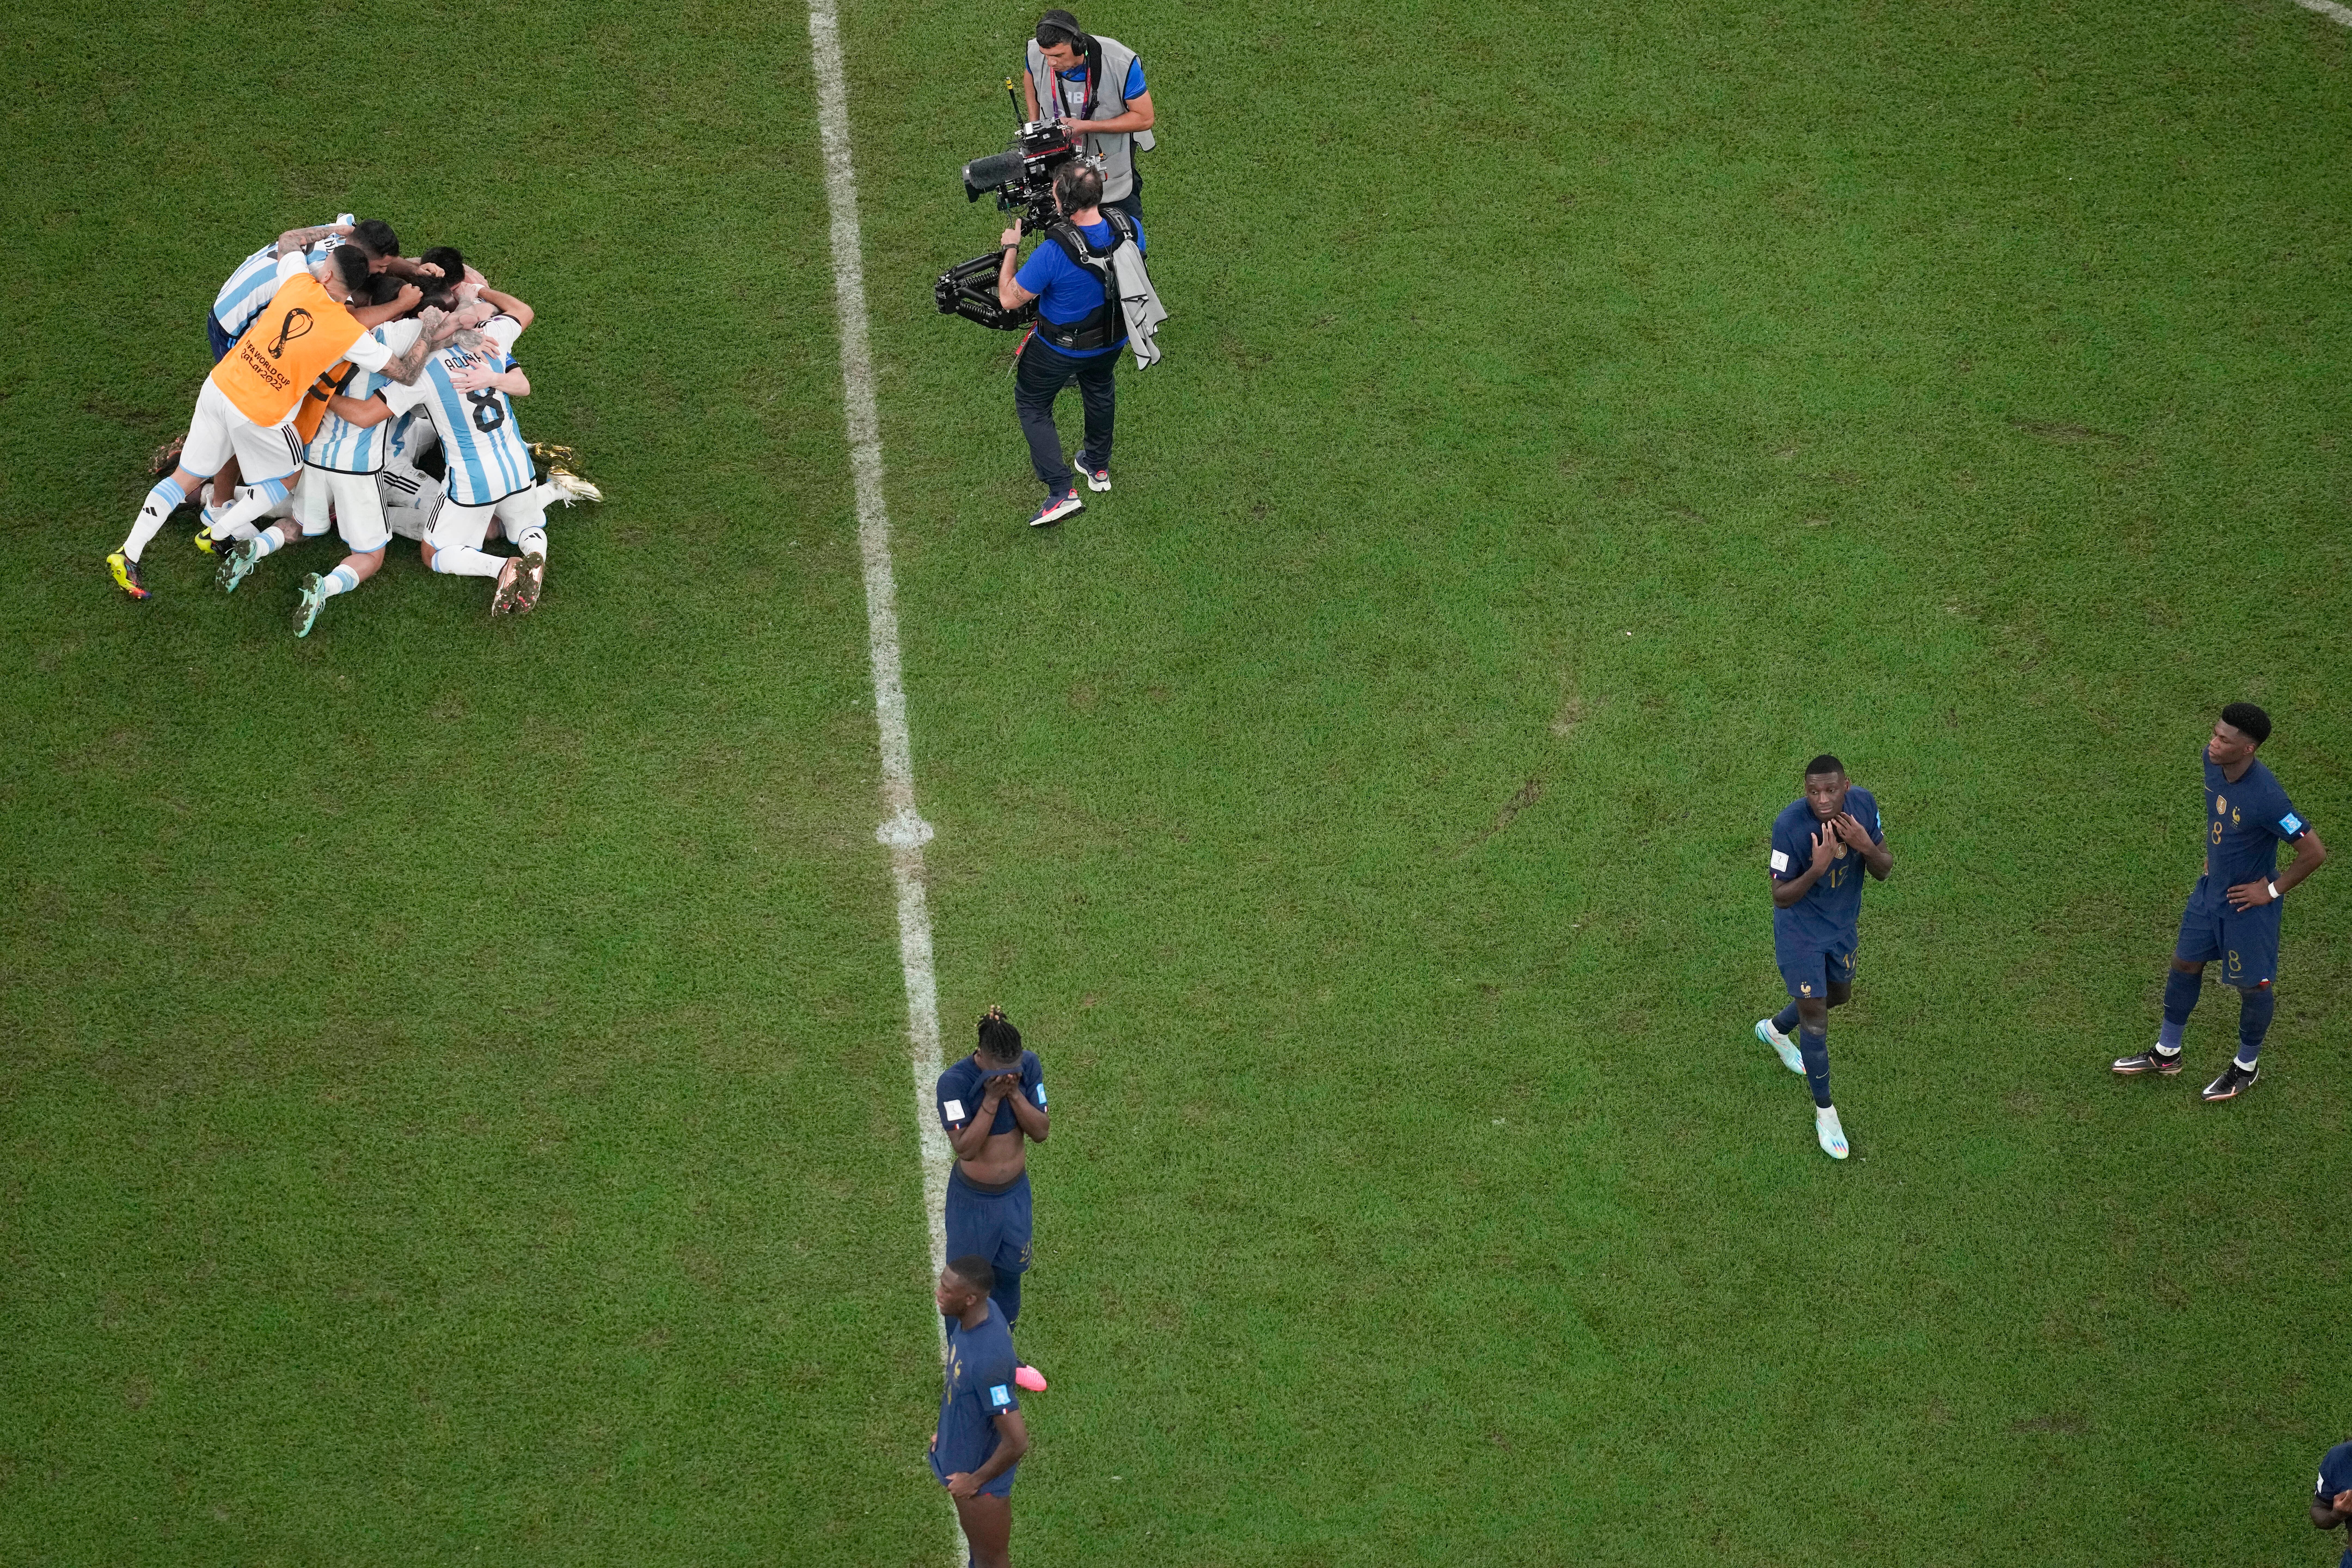 Argentina players celebrate becoming World Champions as France players stand dejected